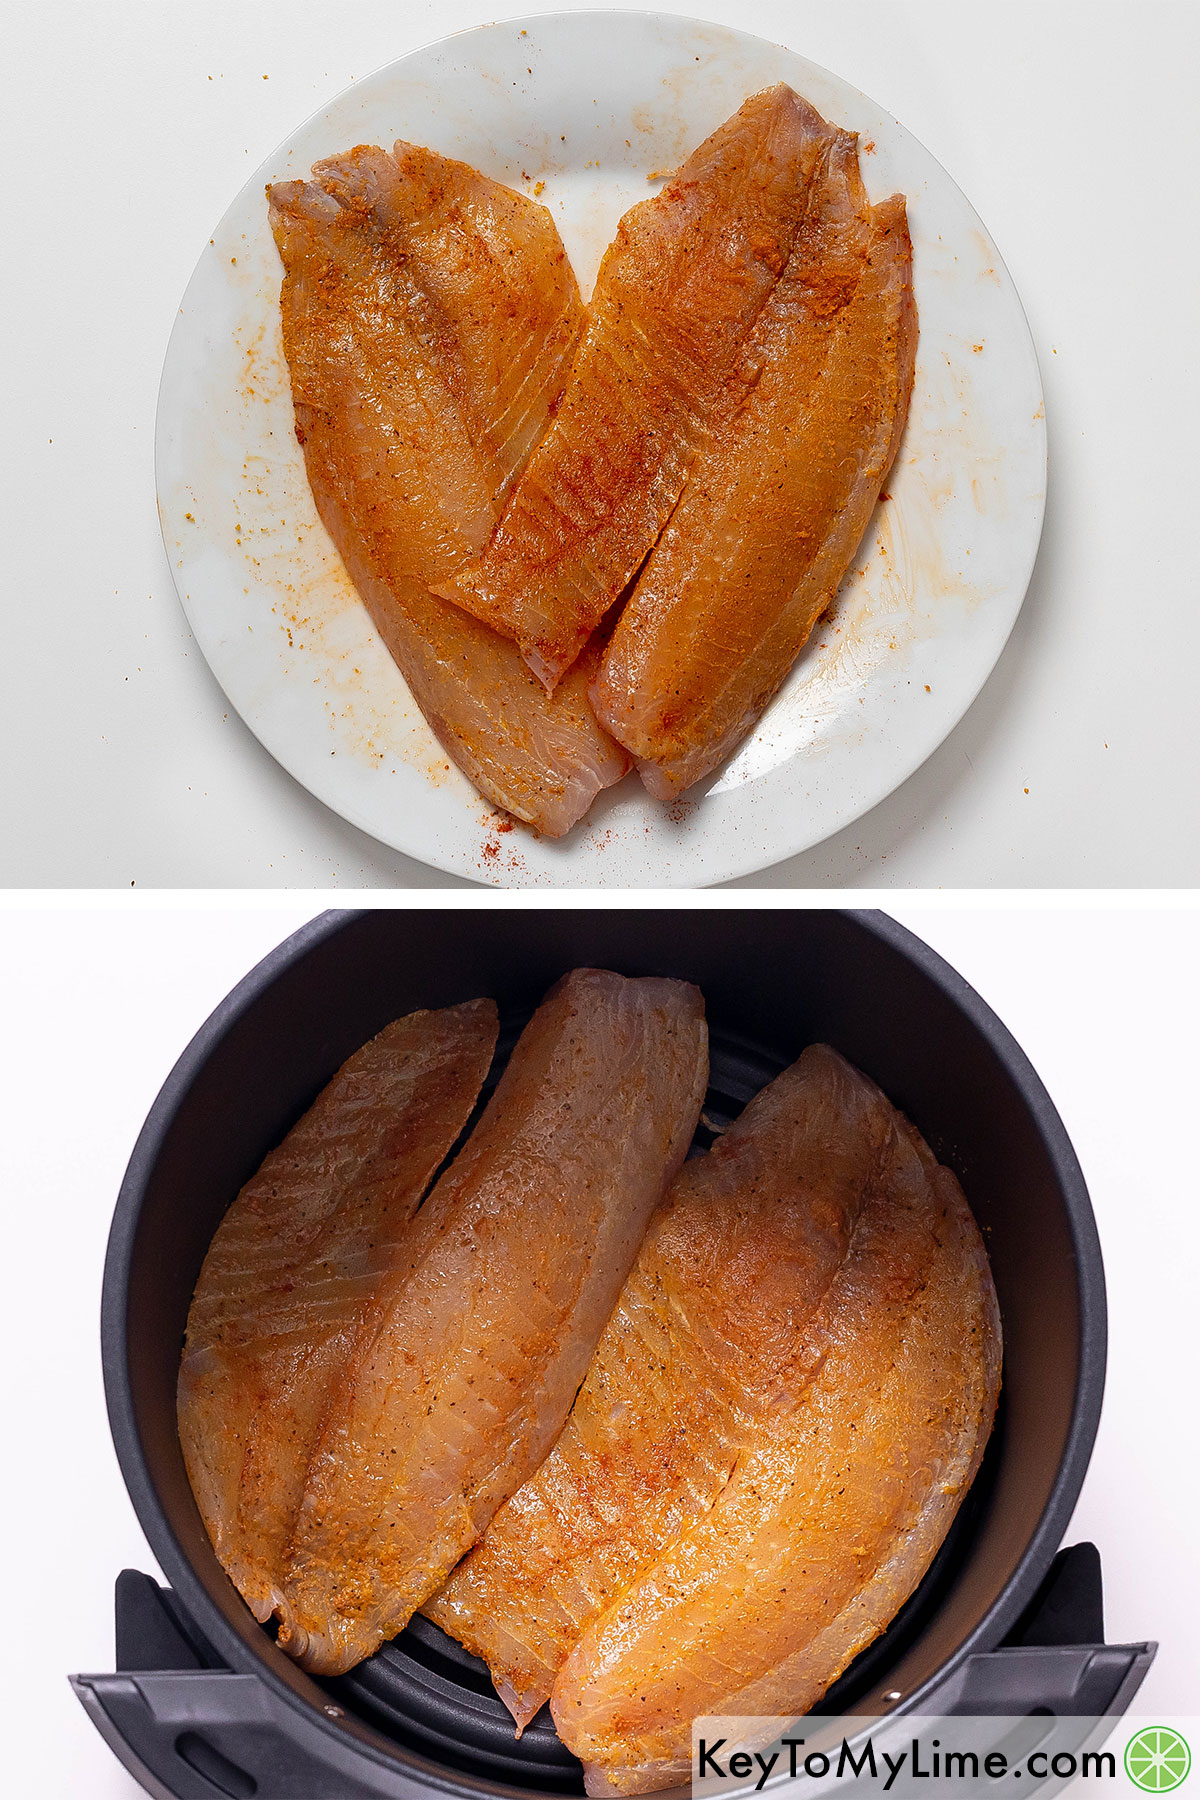 A pair seasoned tilapia fillets being added to a heated up air fryer basket.